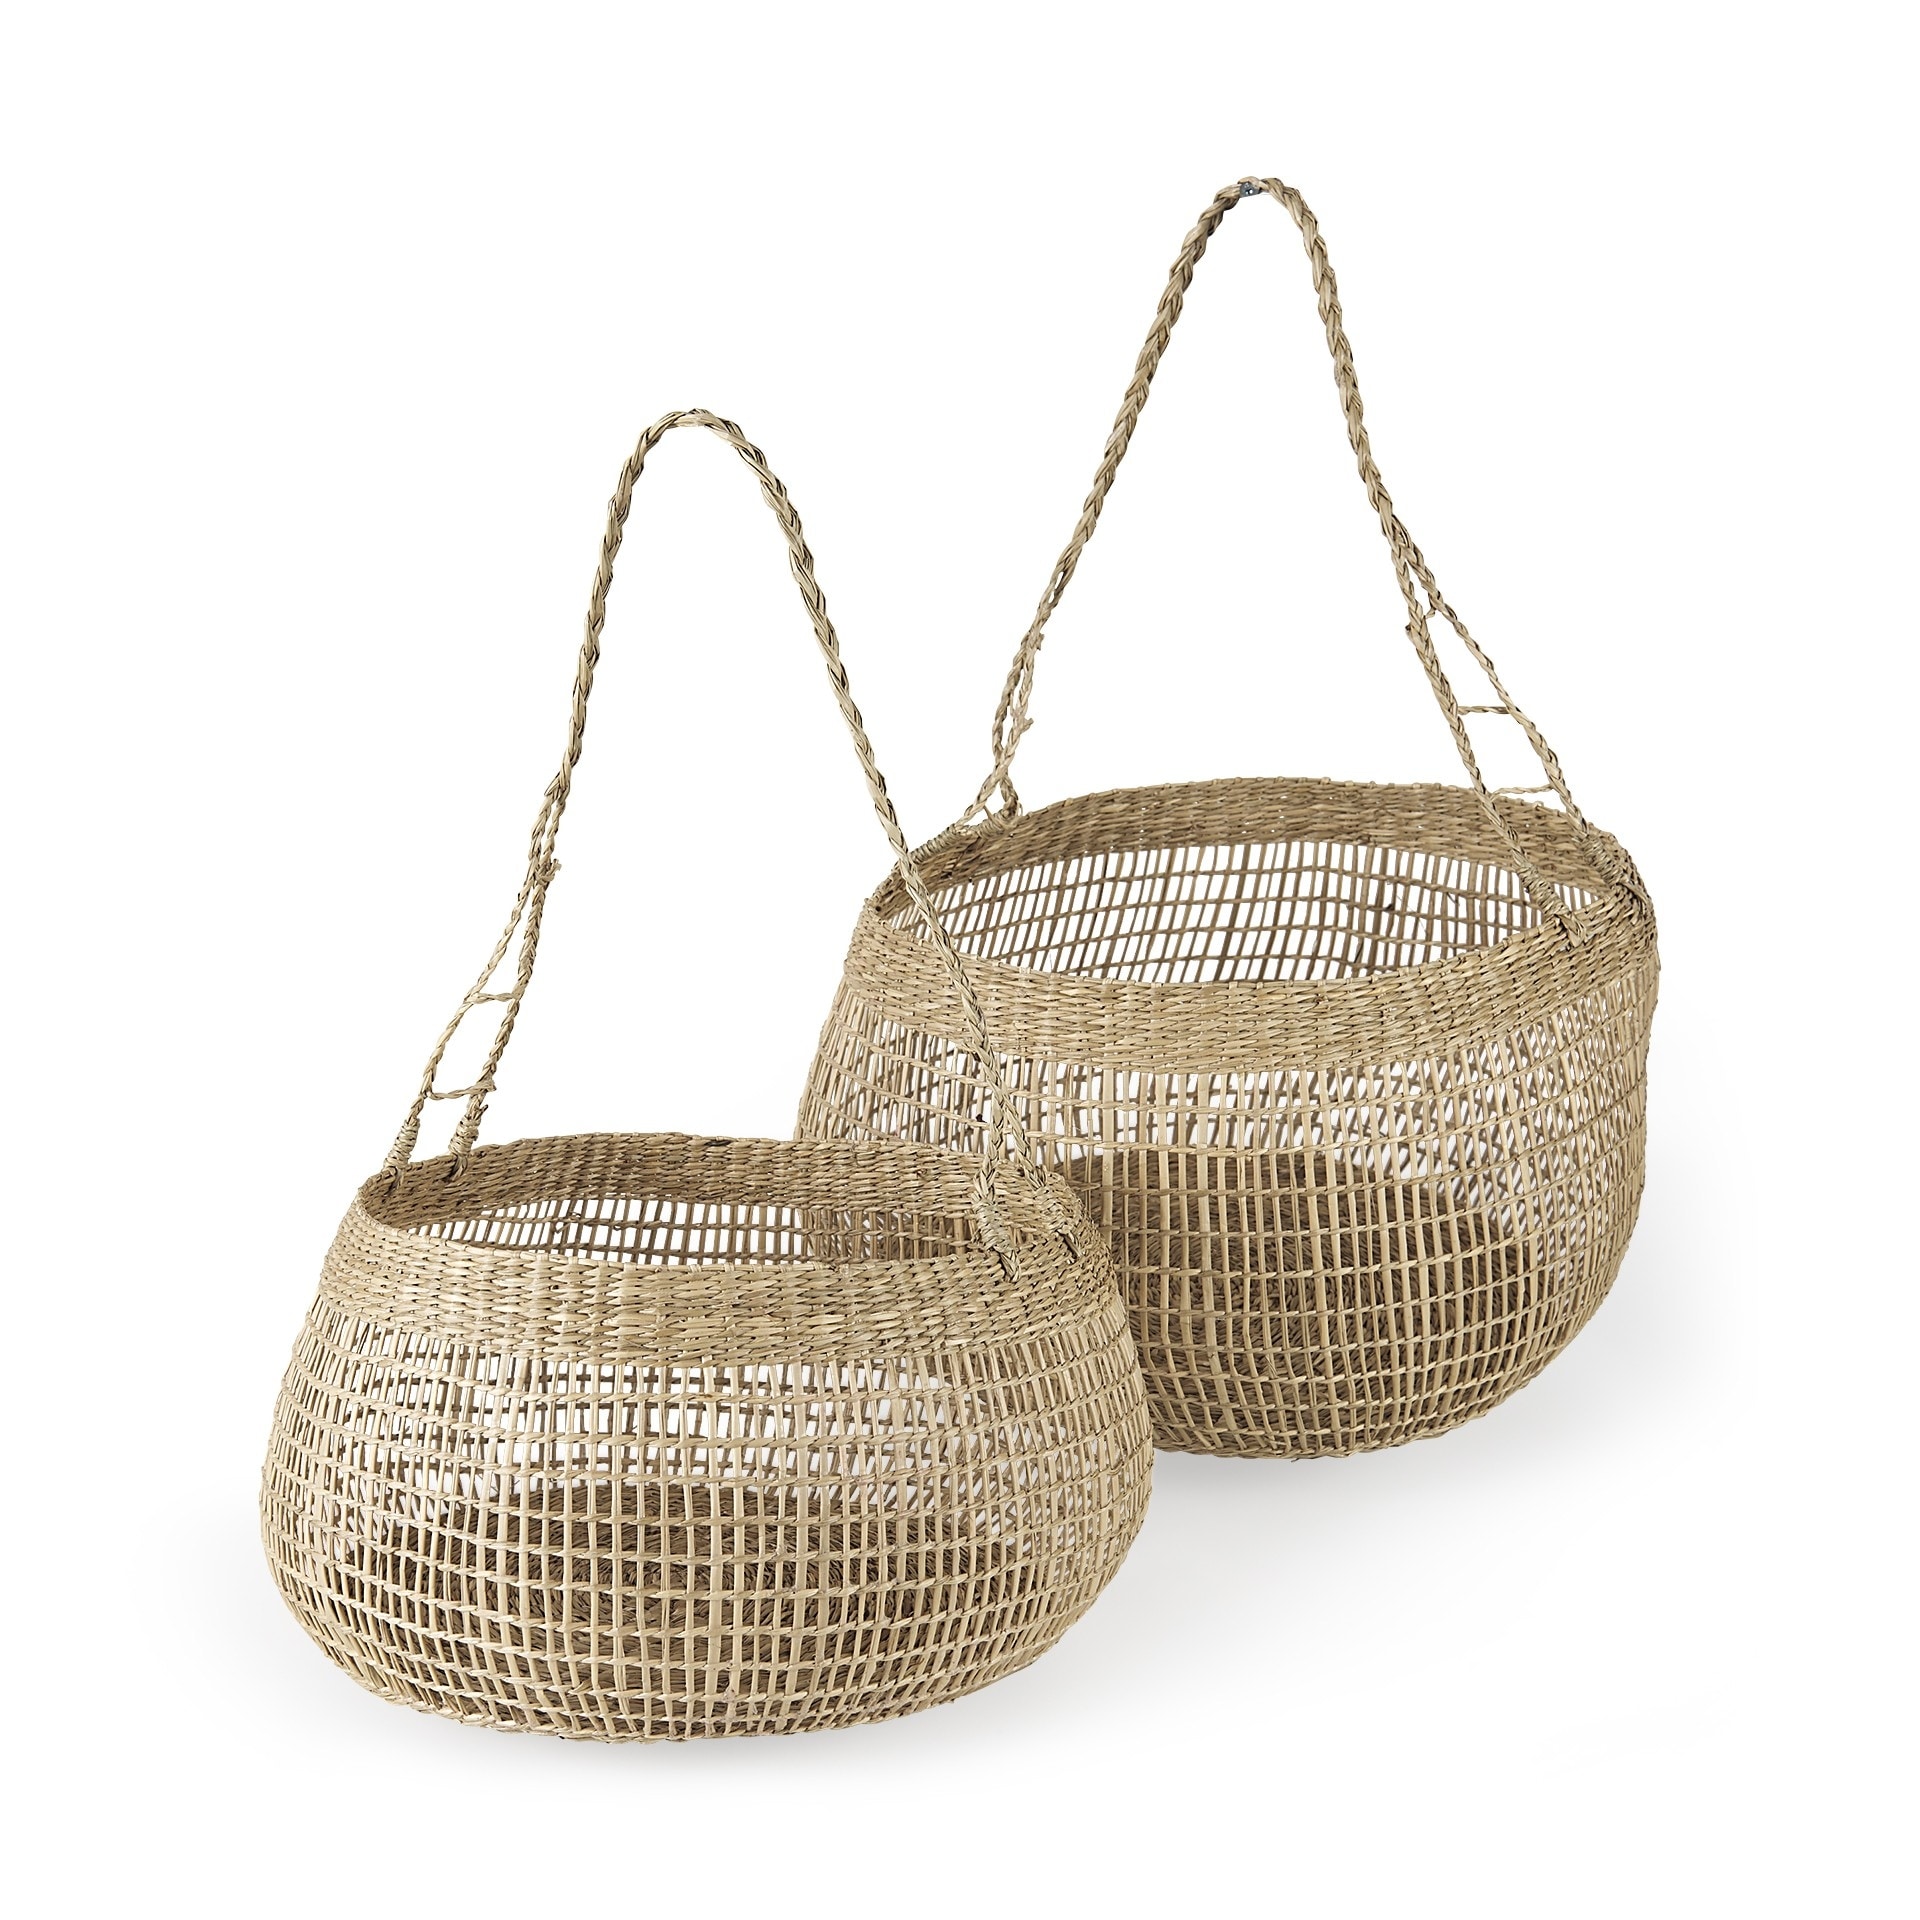 Set of Two Wicker Storage Baskets with Long Handles - 14.9606 W x 14.9606 D x 9.4488 H - Brown